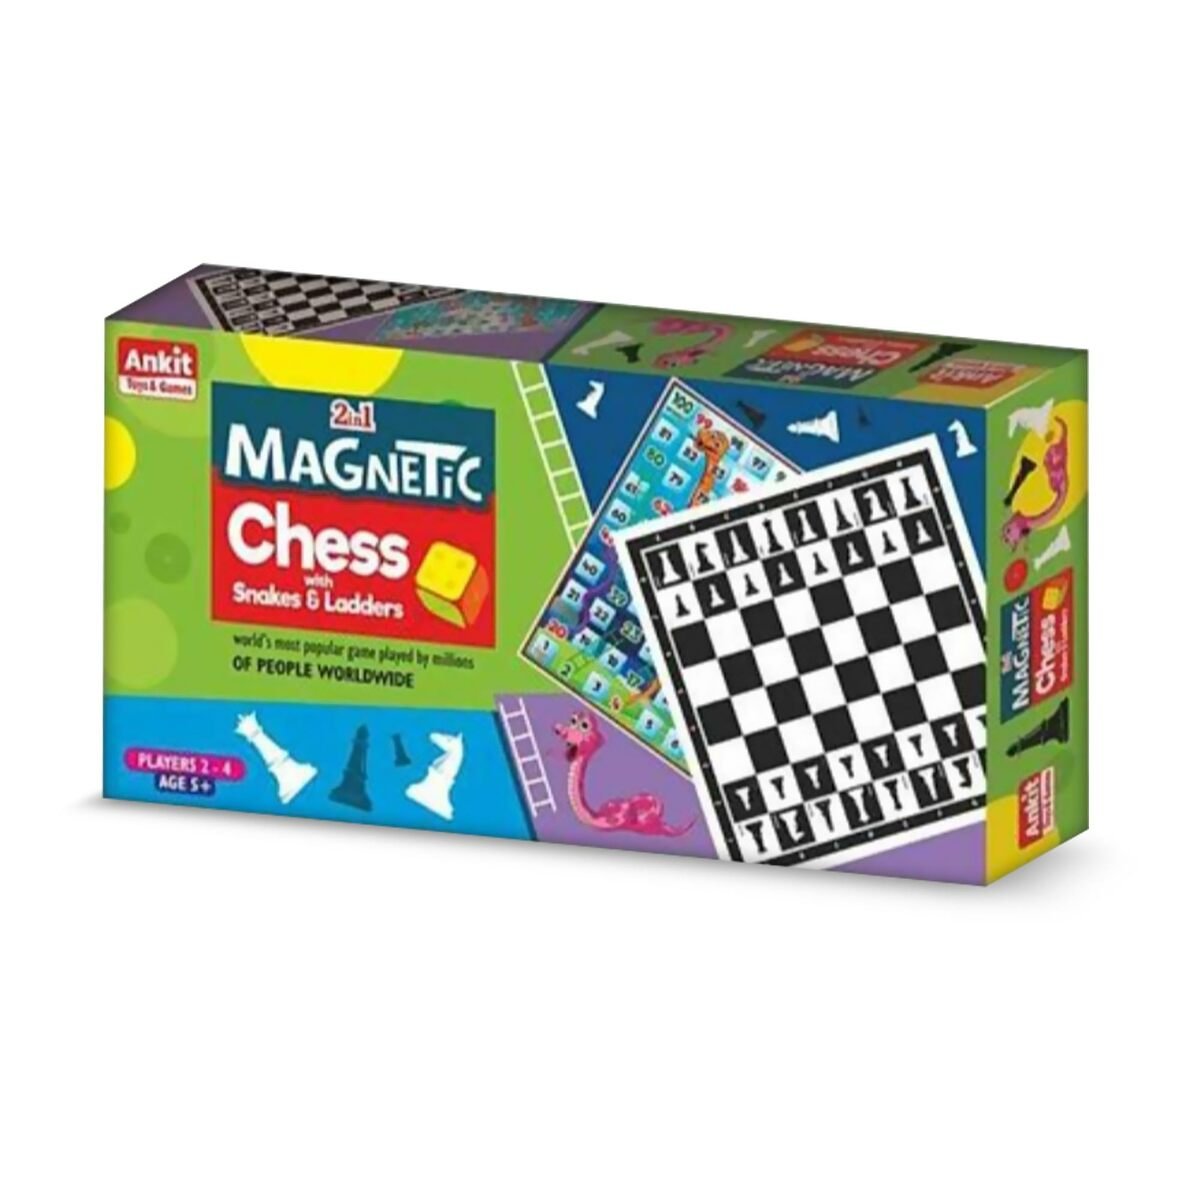 Ankit Chess Magnetic 1709 12"